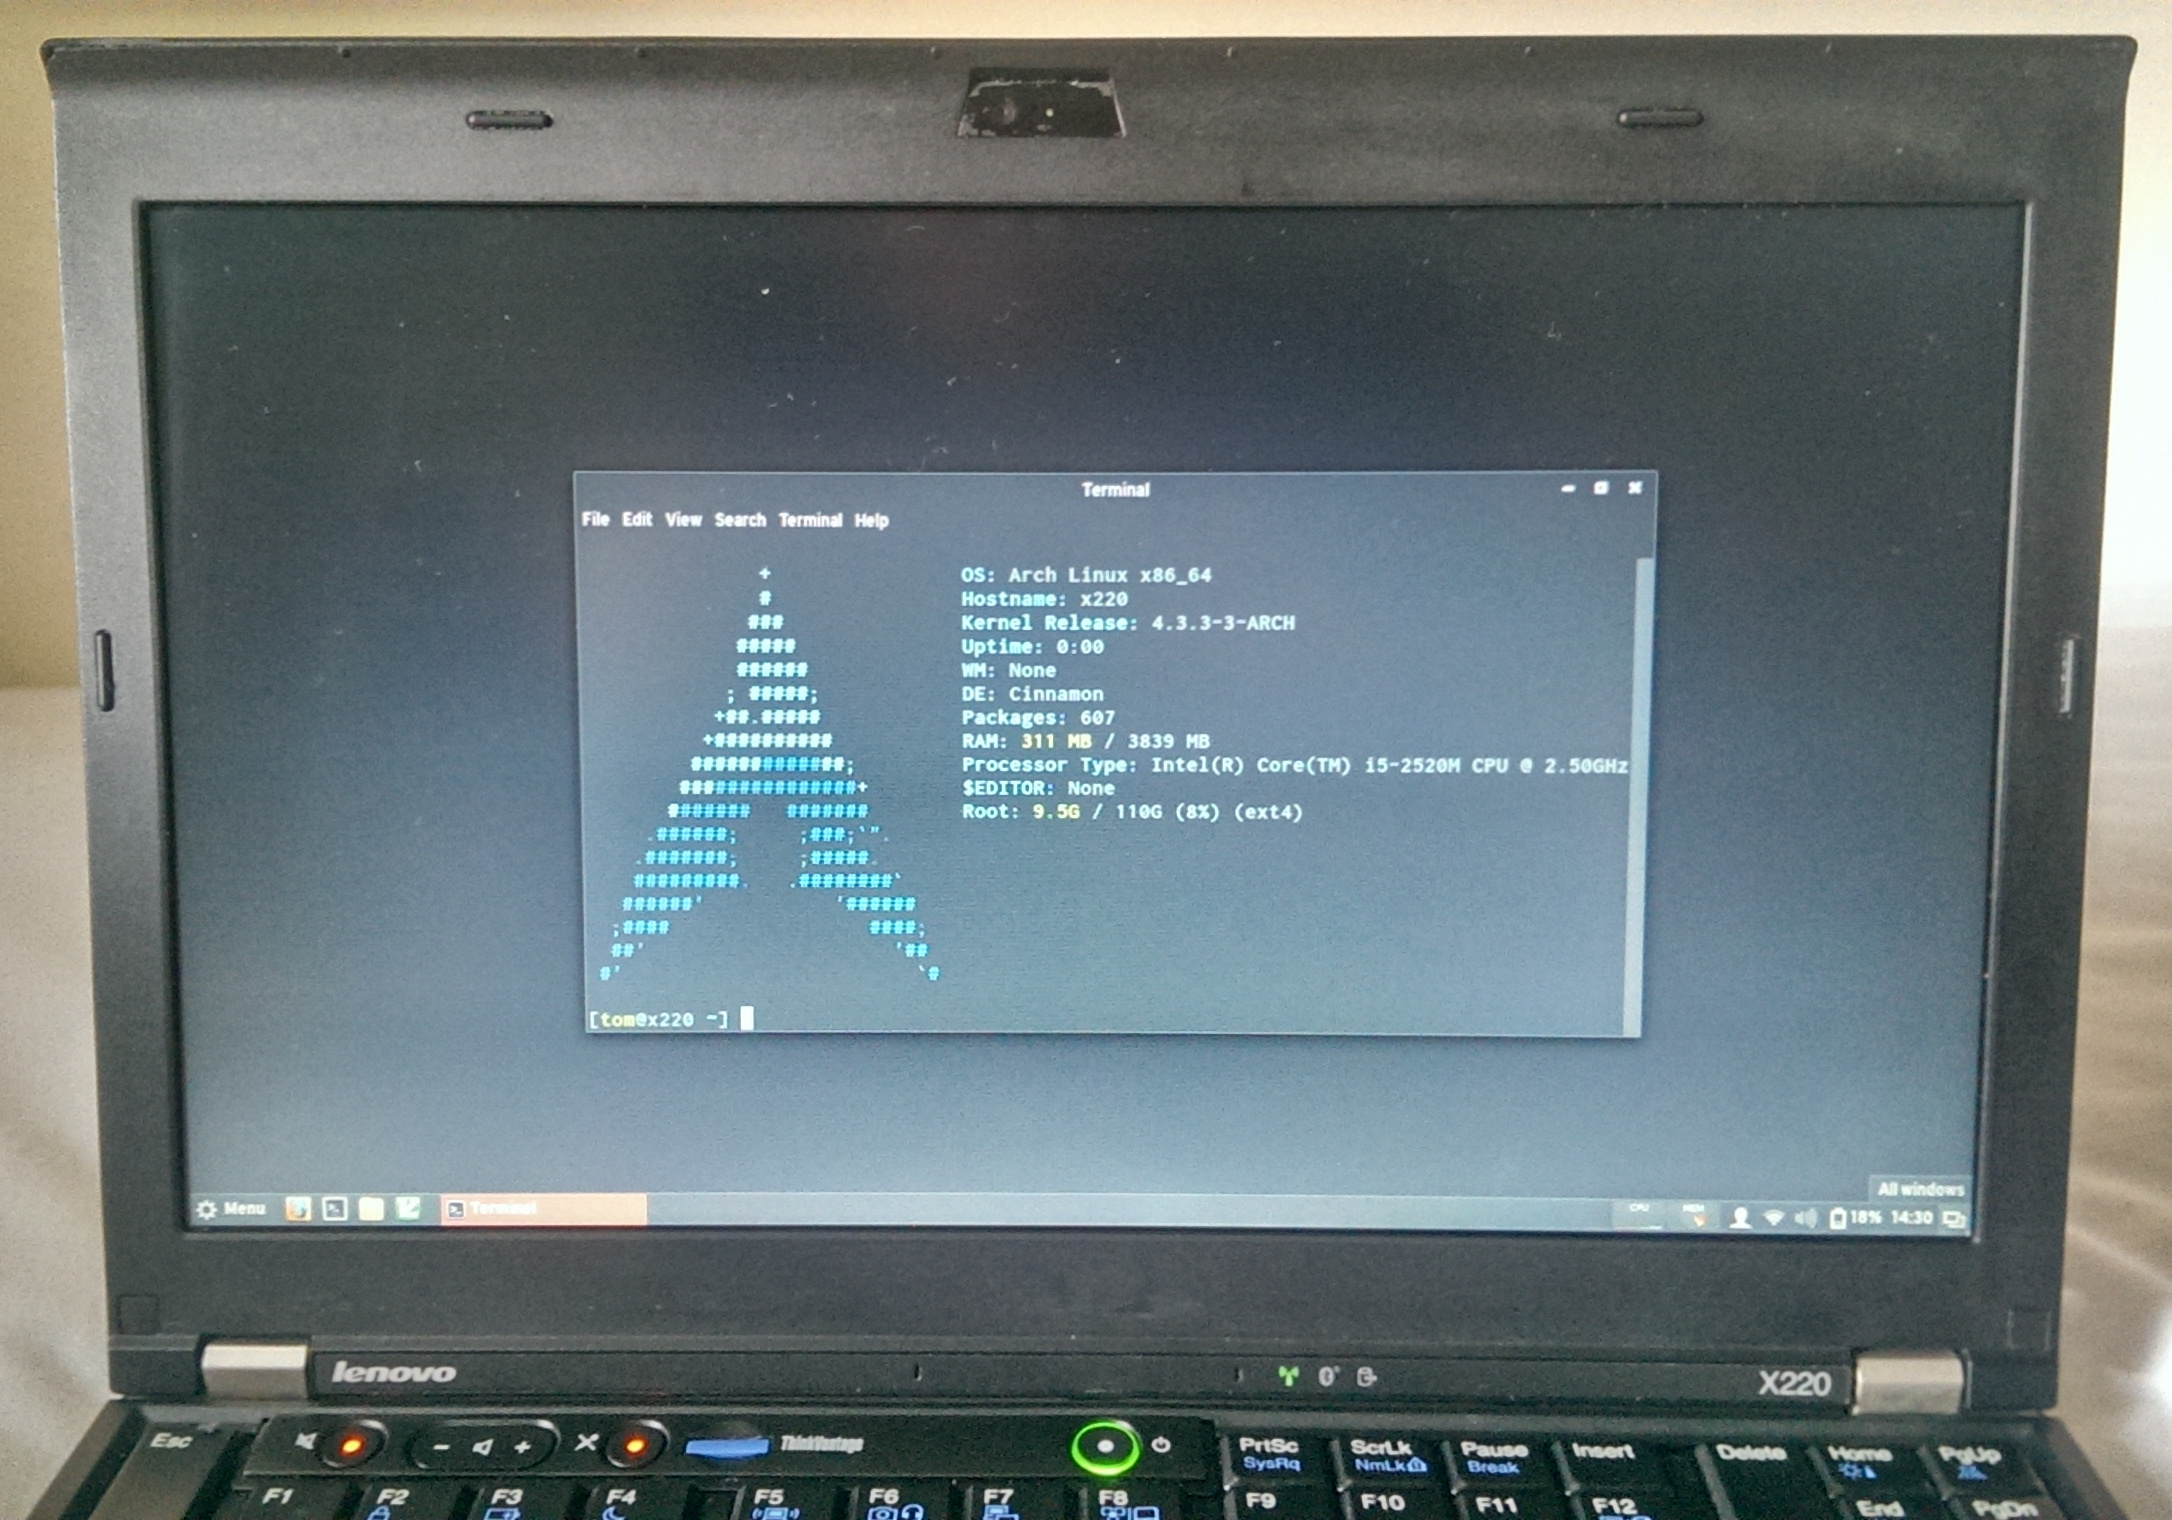 The ThinkPad running Arch Linux.